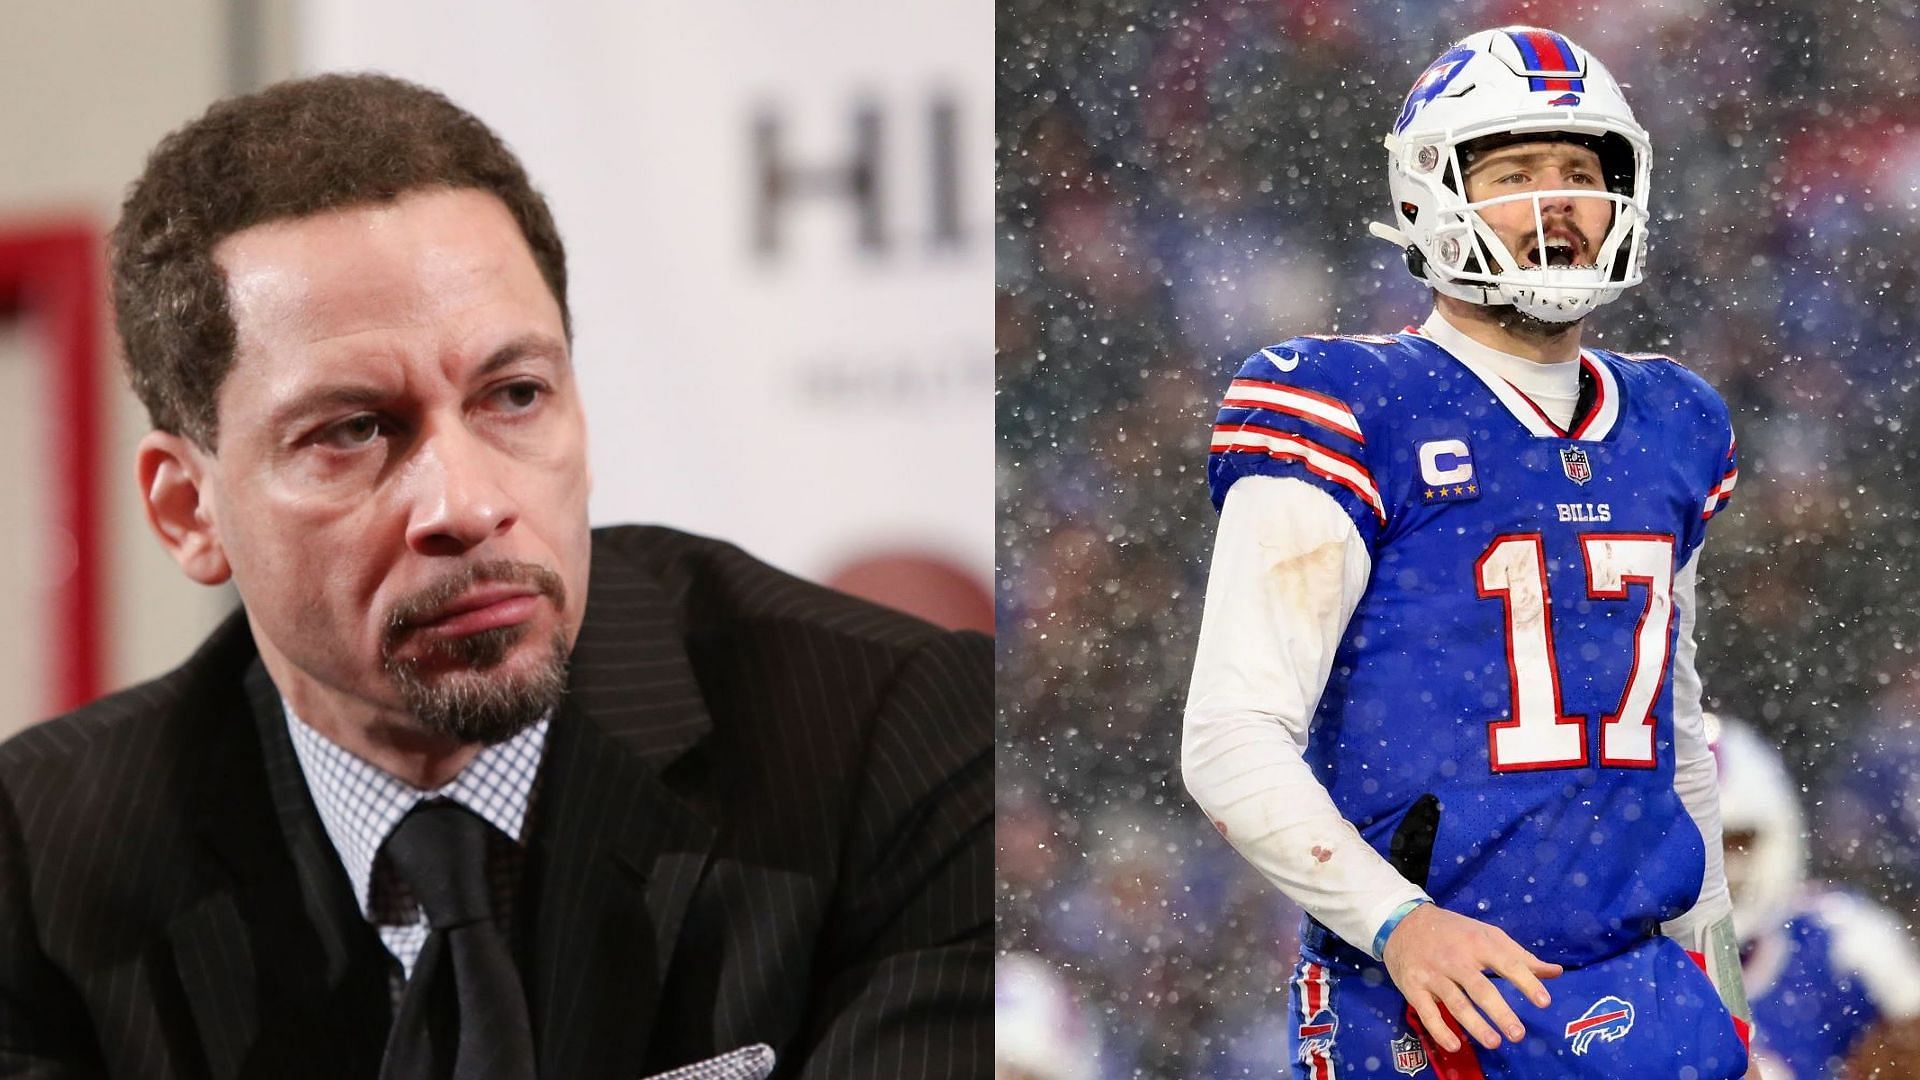 Broussard as called the Bills mentally weak after the Stefon Diggs situation.